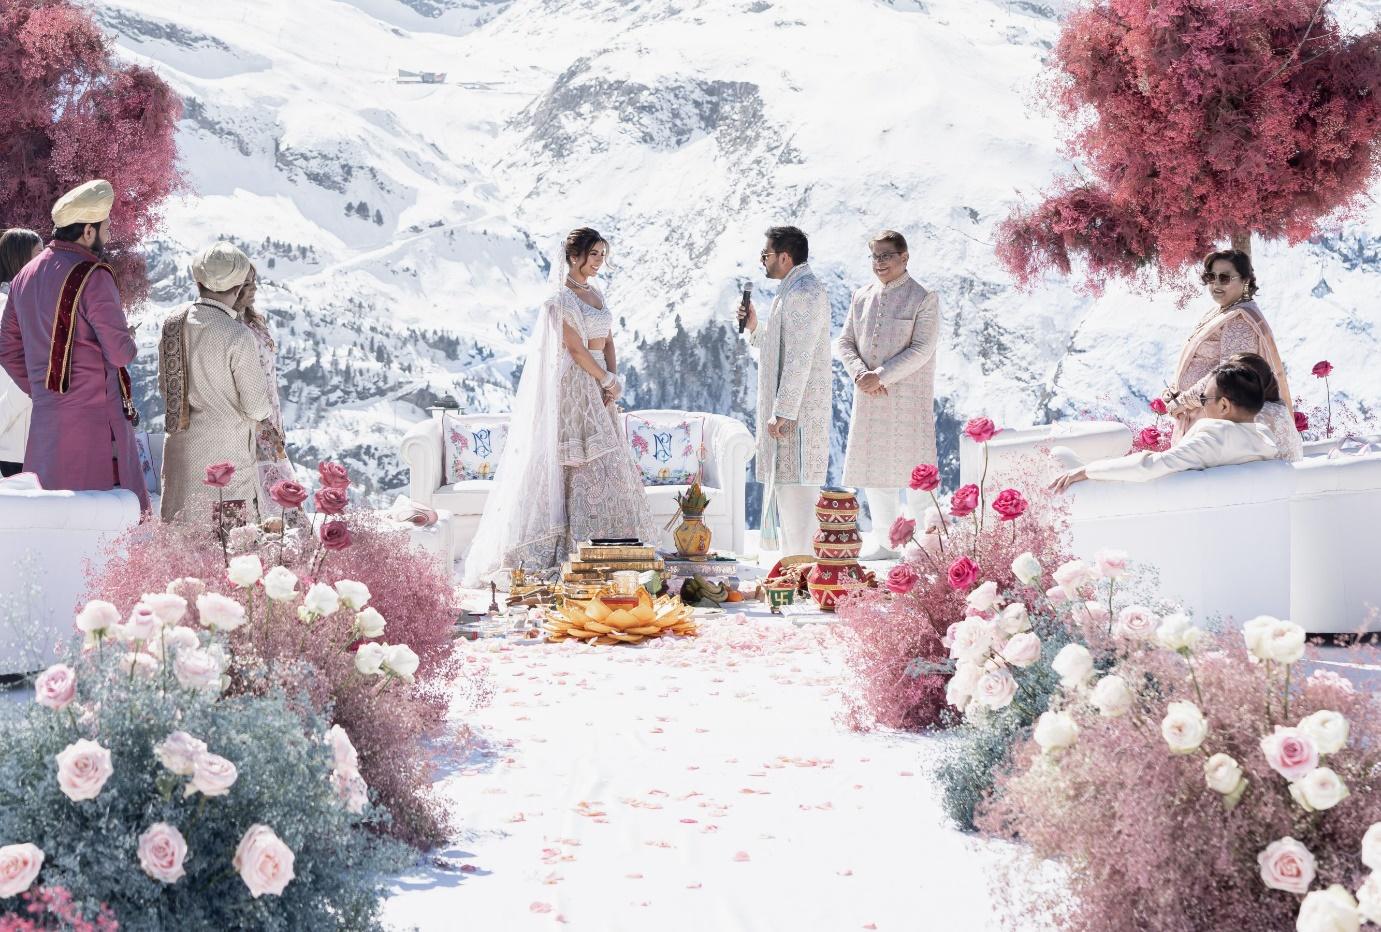 wedding function of Neil and Sonam in between the ice-covered mountains of Switzerland | Wedifys